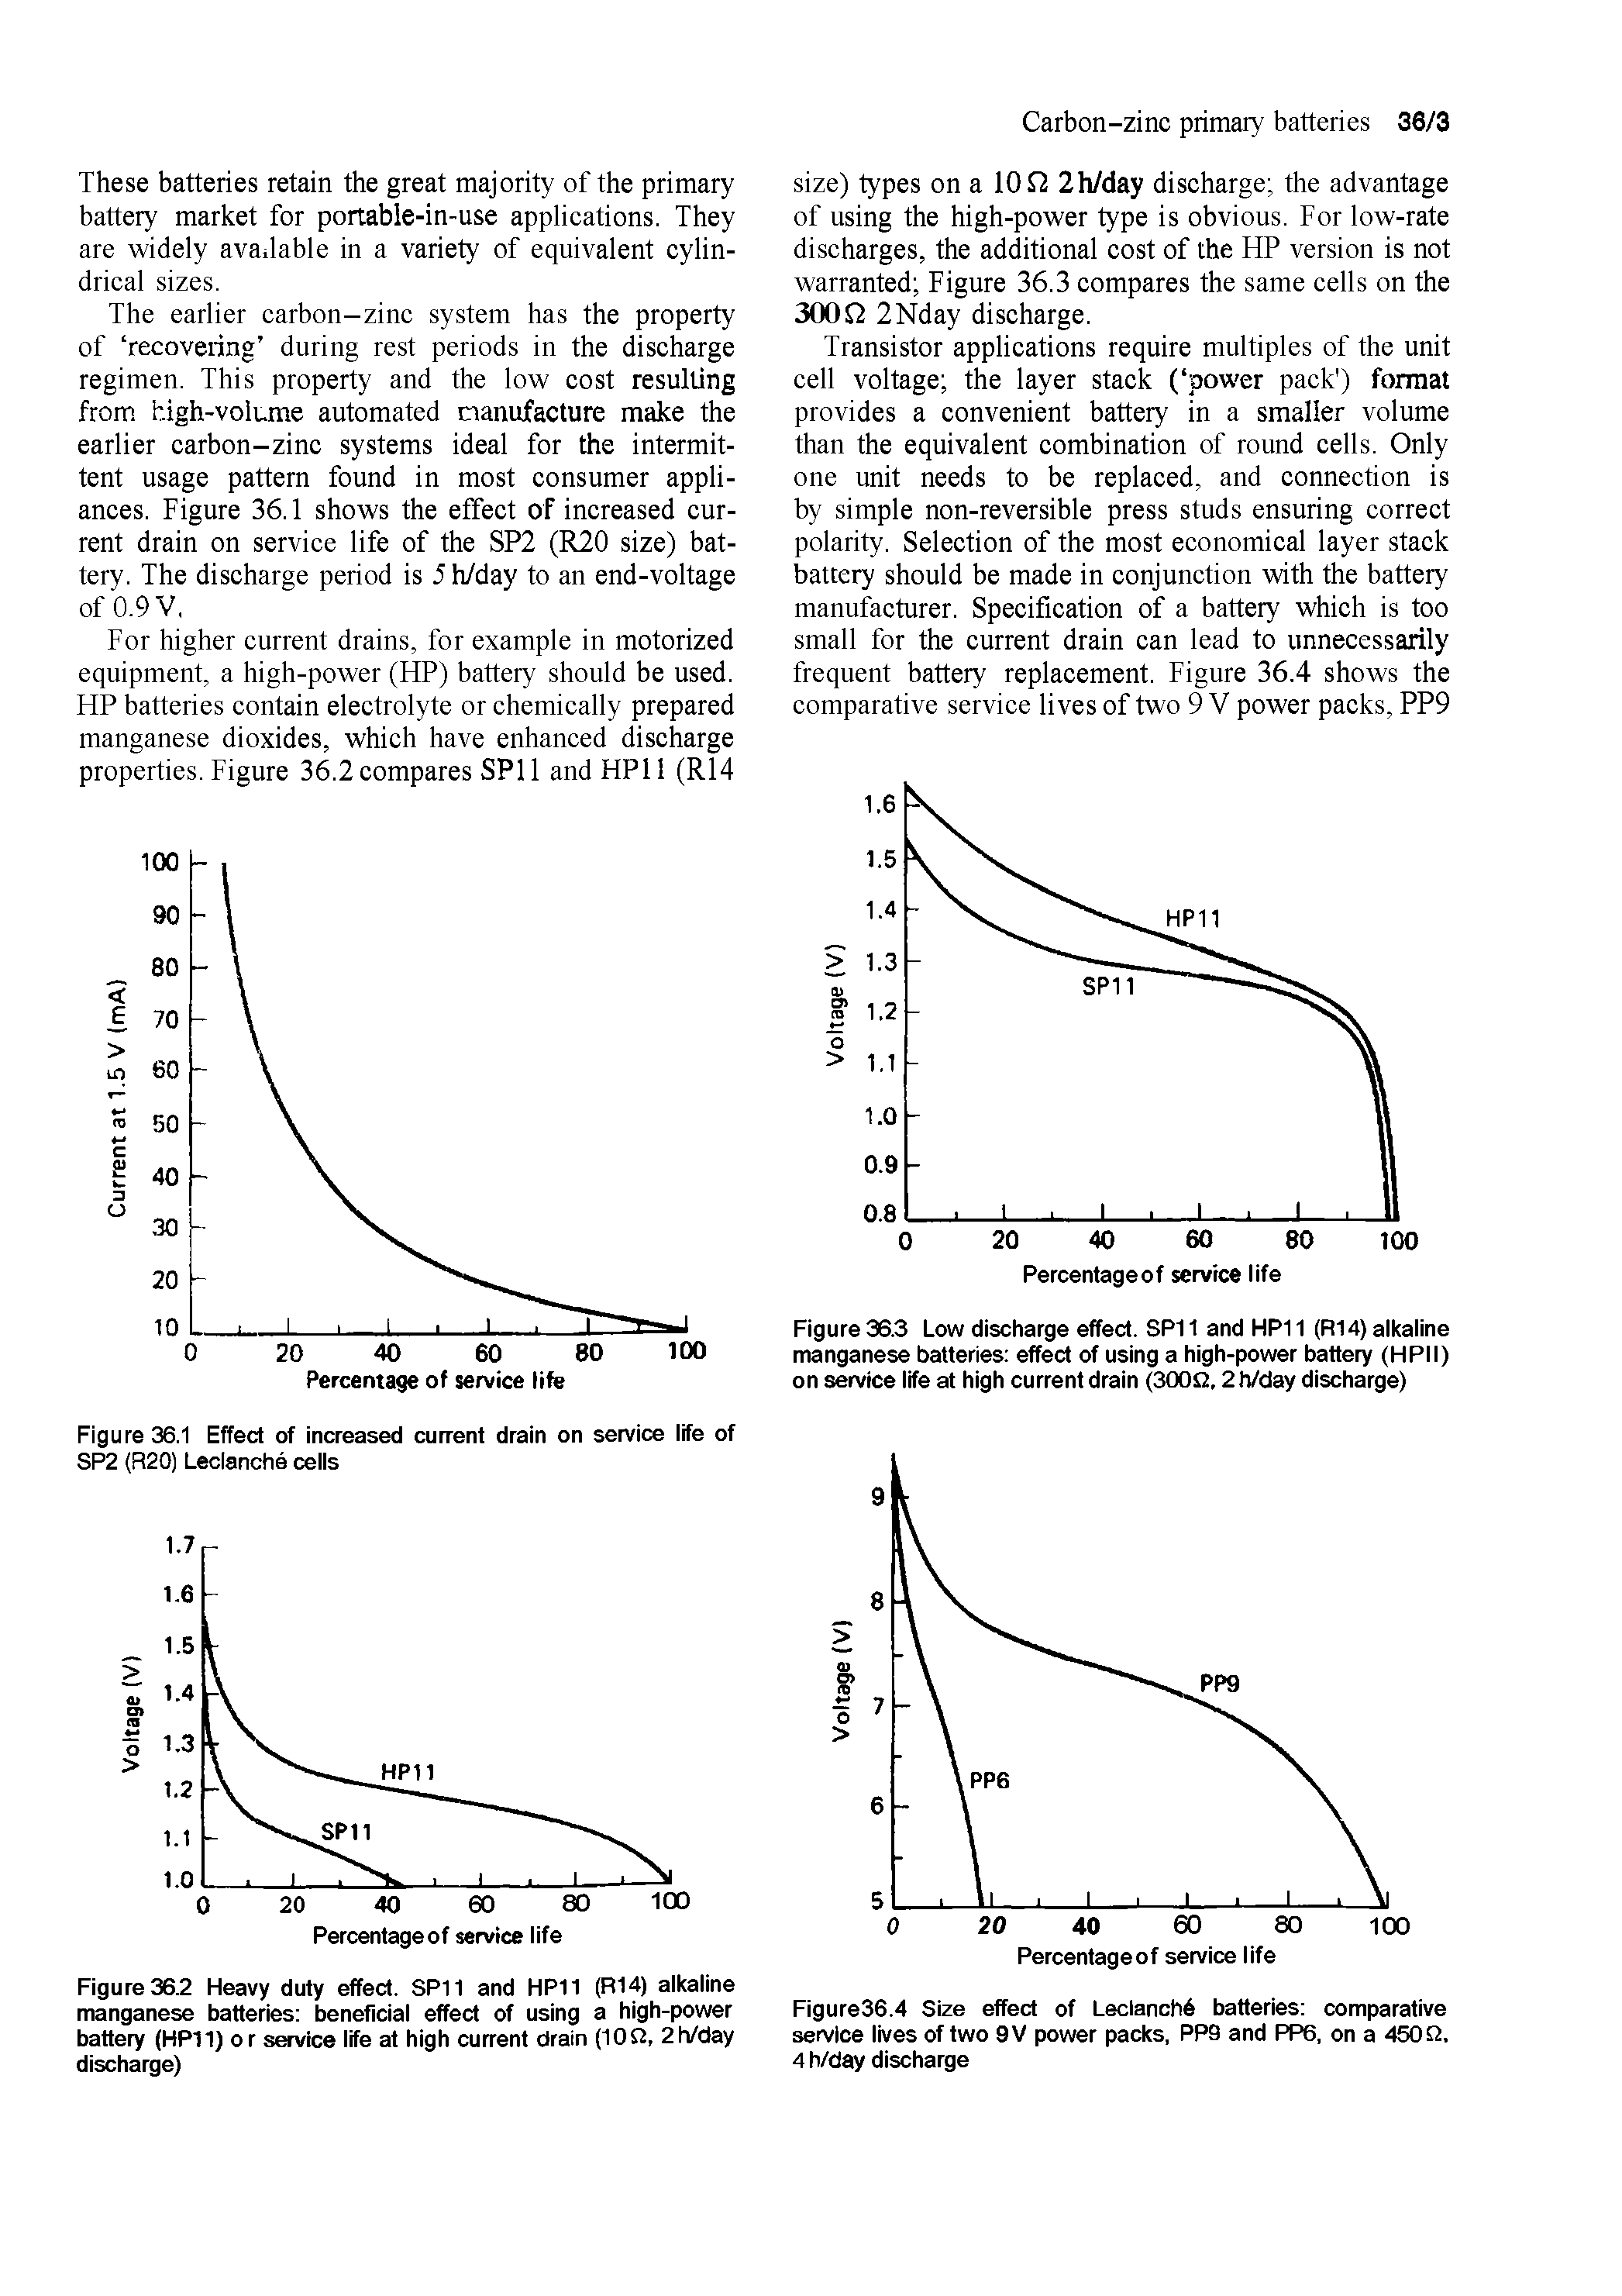 Figure 36.3 Low discharge effect. SP11 and HP11 (R14) alkaline manganese batteries effect of using a high-power battery (HPll) on service life at high current drain (300f2.2 h/day discharge)...